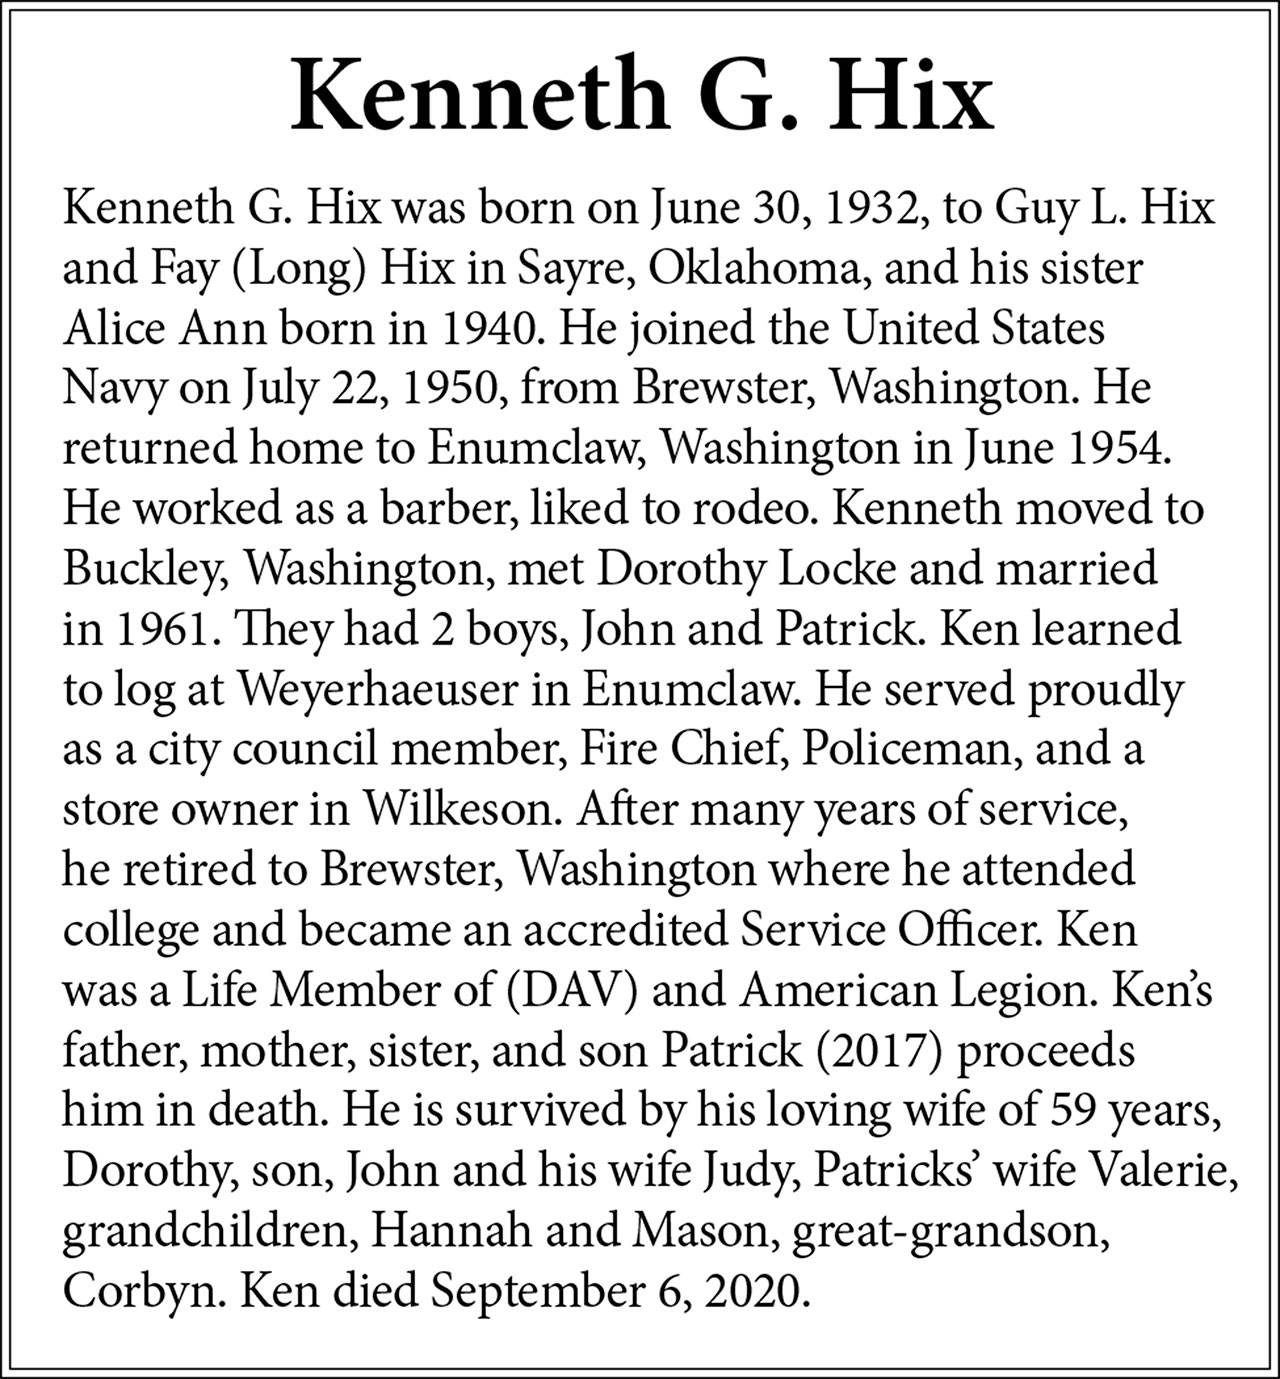 Obit for Kenneth Hix